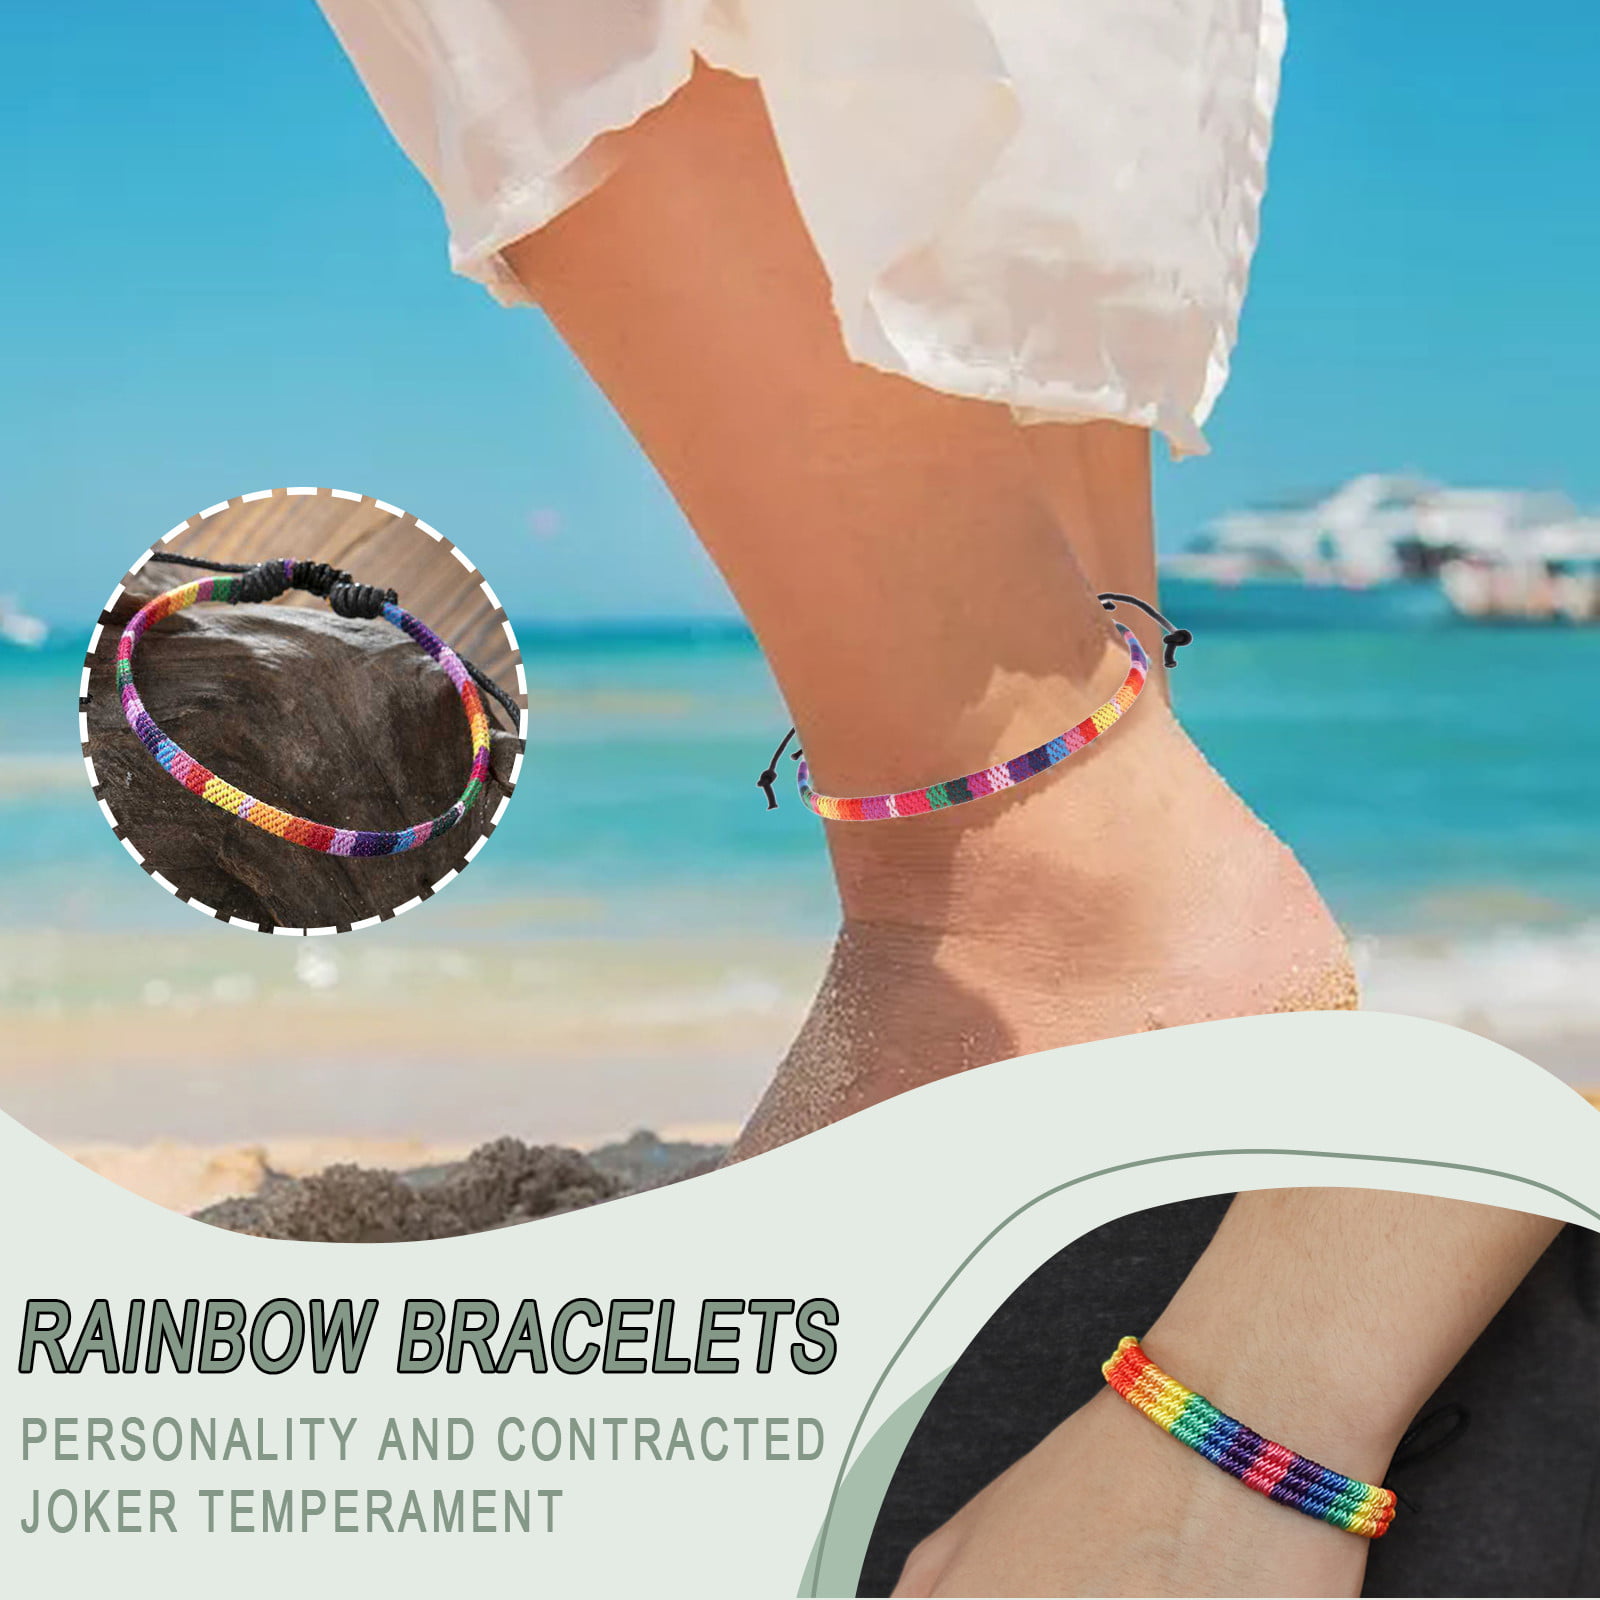 Braided and Classic String Styles Waterproof and Adjustable Rainbow LGBTQ Pride Bracelets!